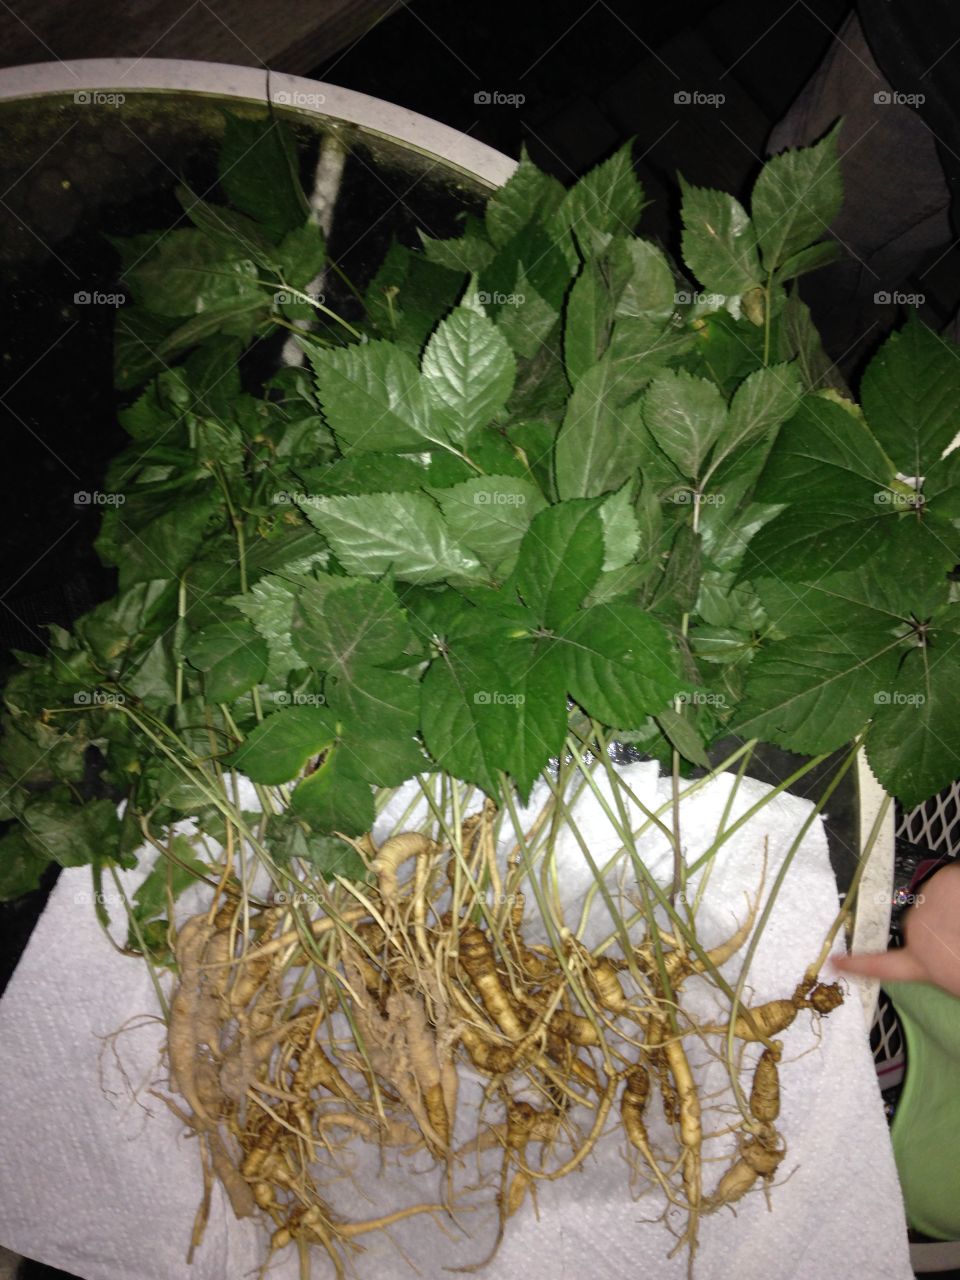 Ginseng harvest fall 2015. Ginseng harvested mature plants from 2015 fall season